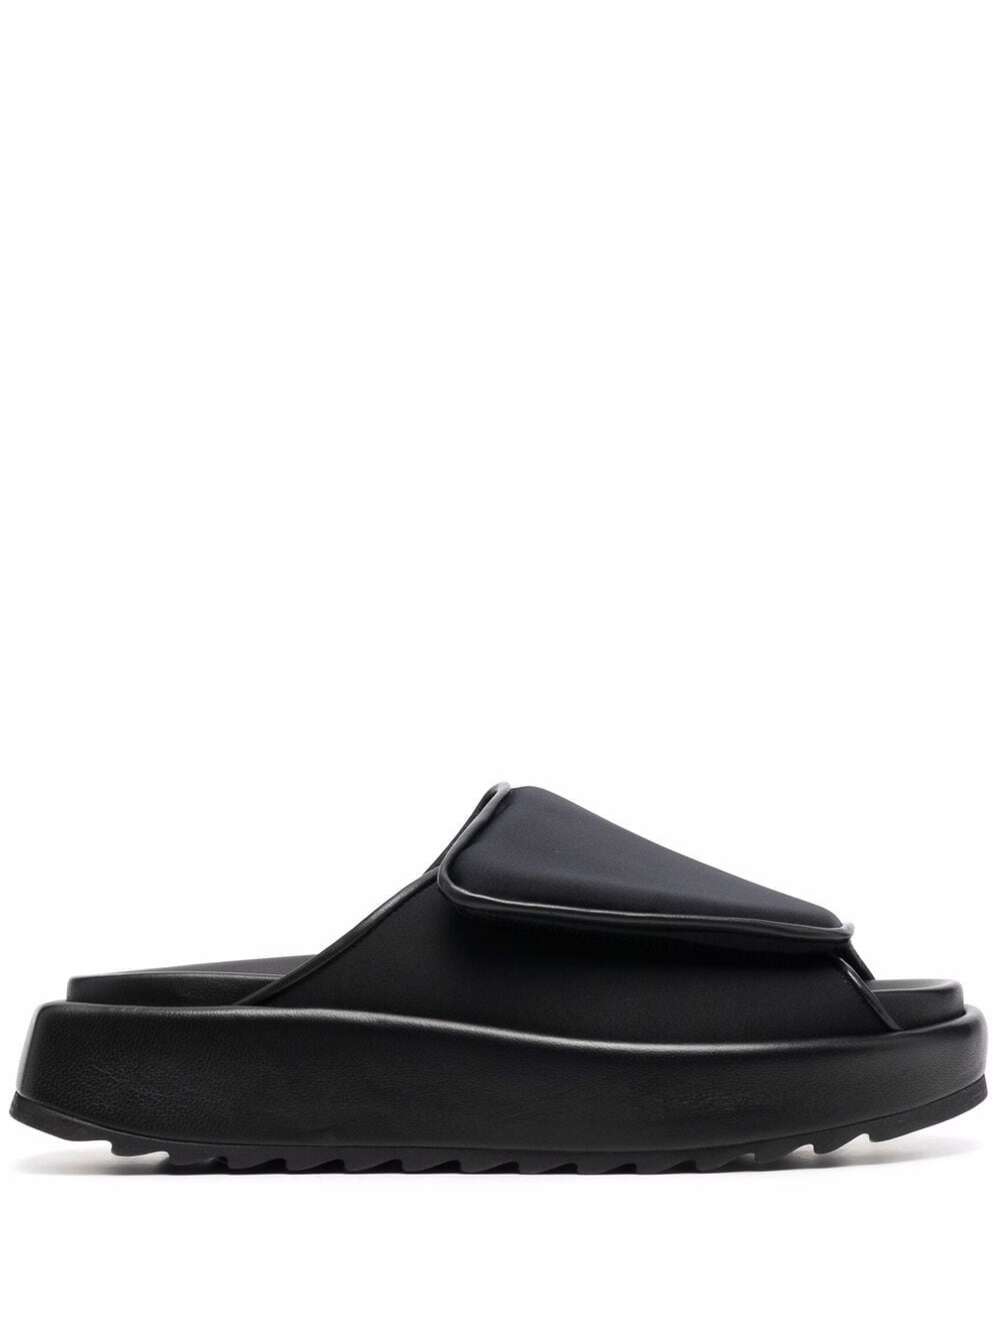 Black Leather And Scuba Slide Sandals With Velcro Closure